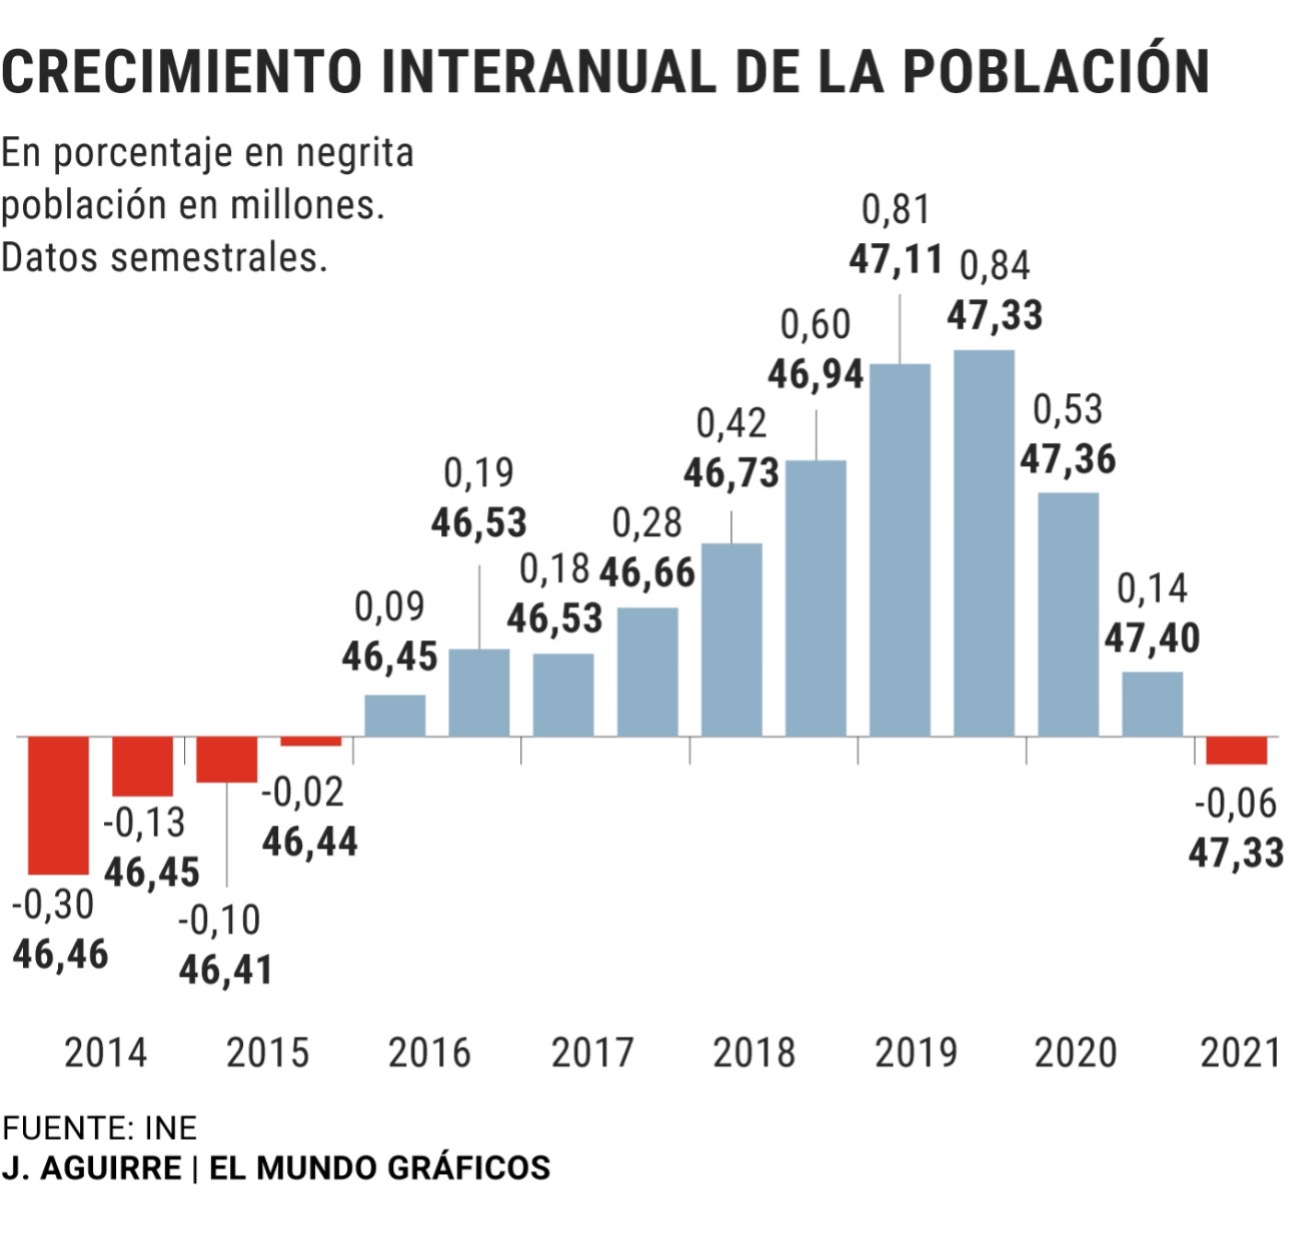 [GRAPH] Year-on-year population growth in Spain - INE